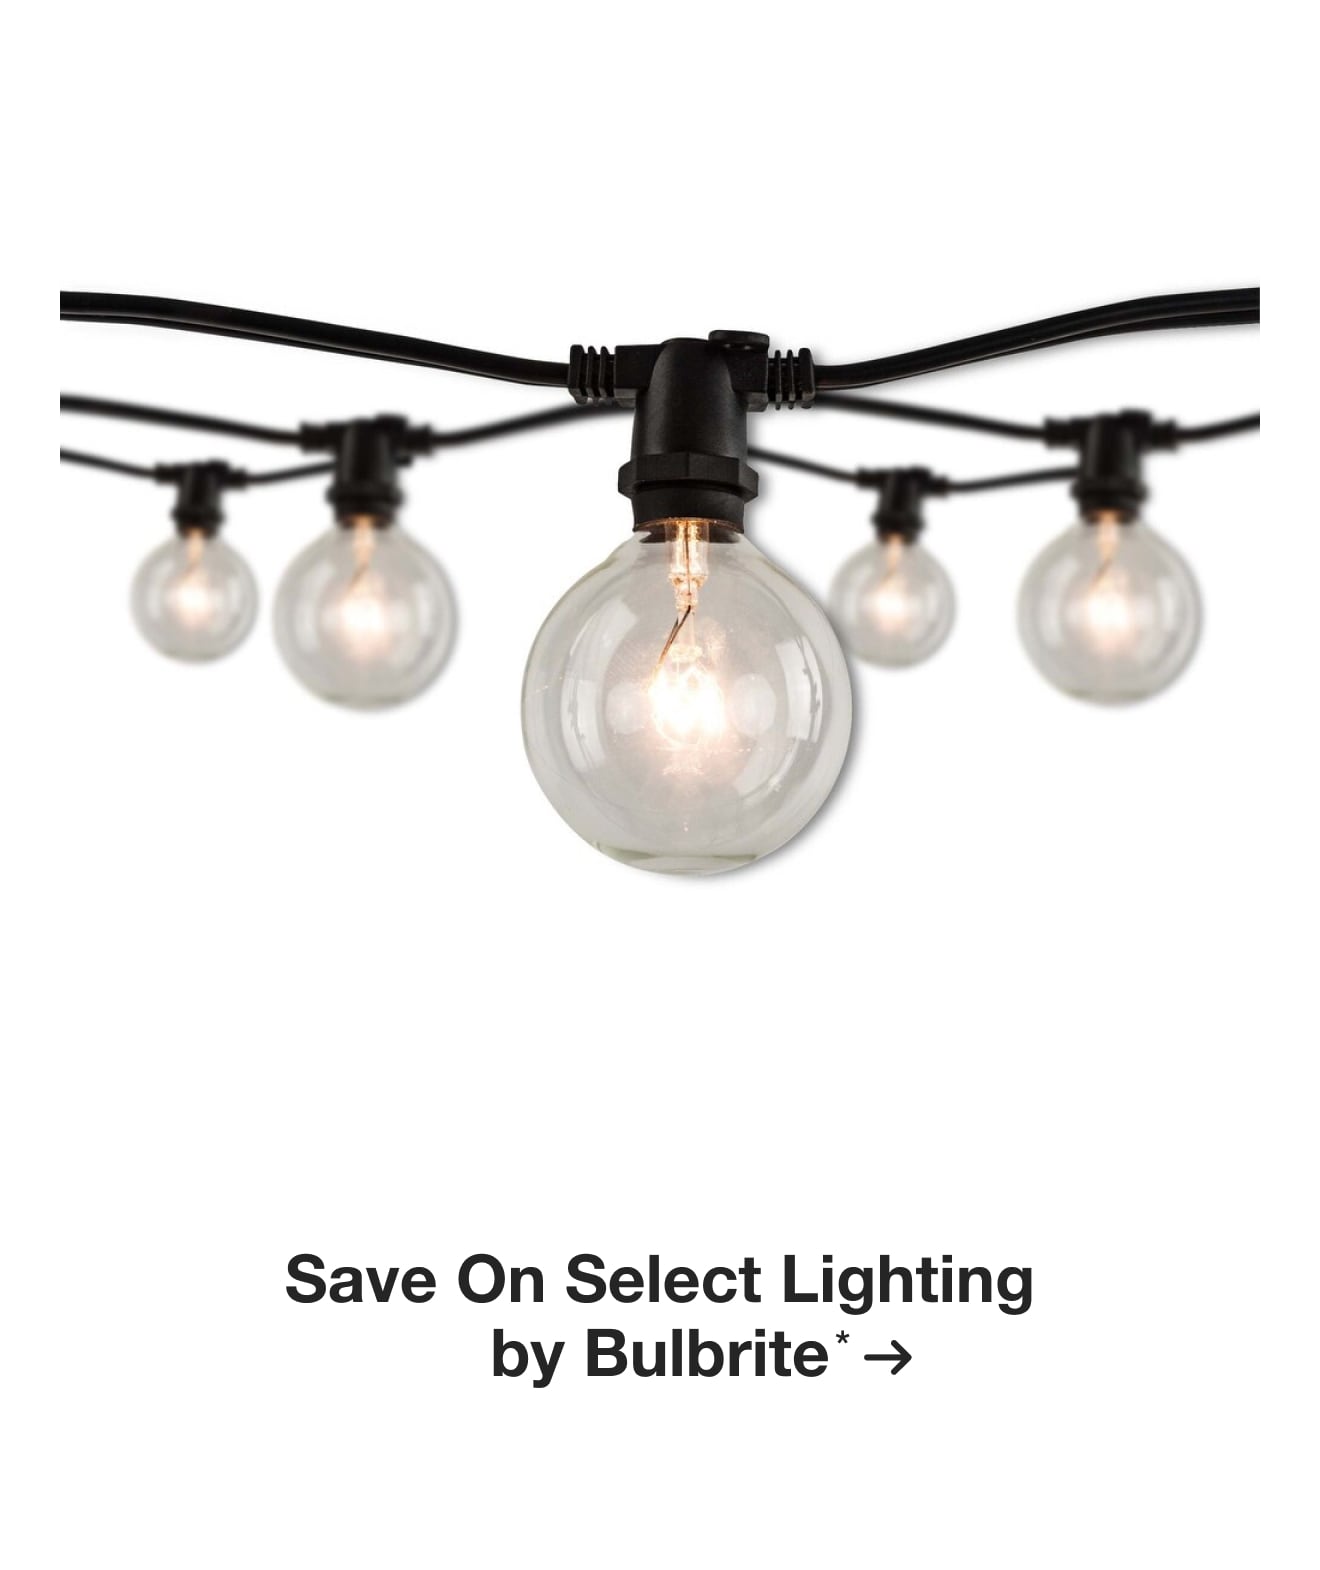 Save On Select Lighting by Bulbrite